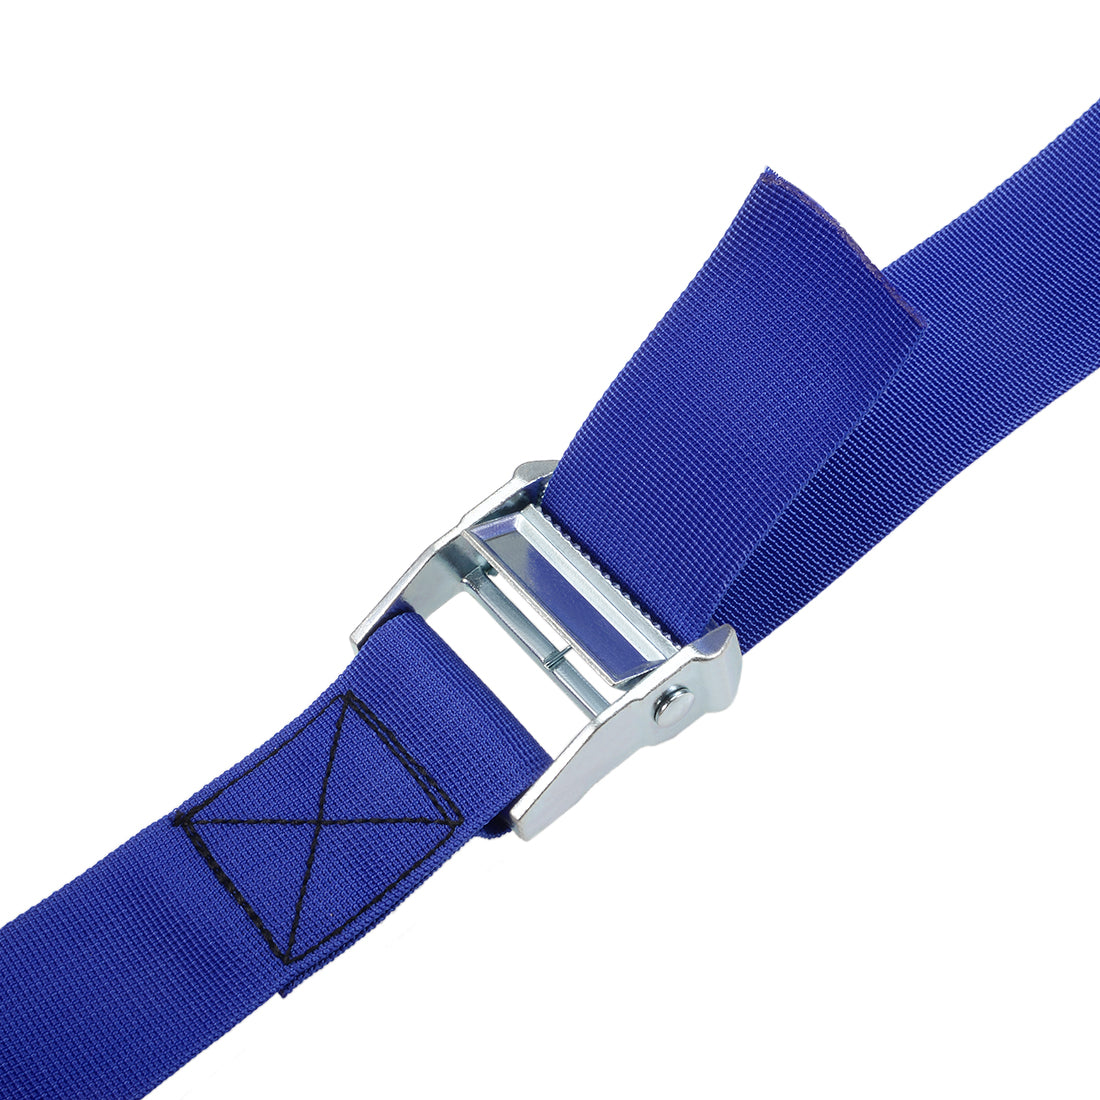 uxcell Uxcell 2.5M x 5cm Lashing Strap Cargo Tie Down Straps w Cam Lock Buckle 500Kg Work Load, Blue, 2Pcs